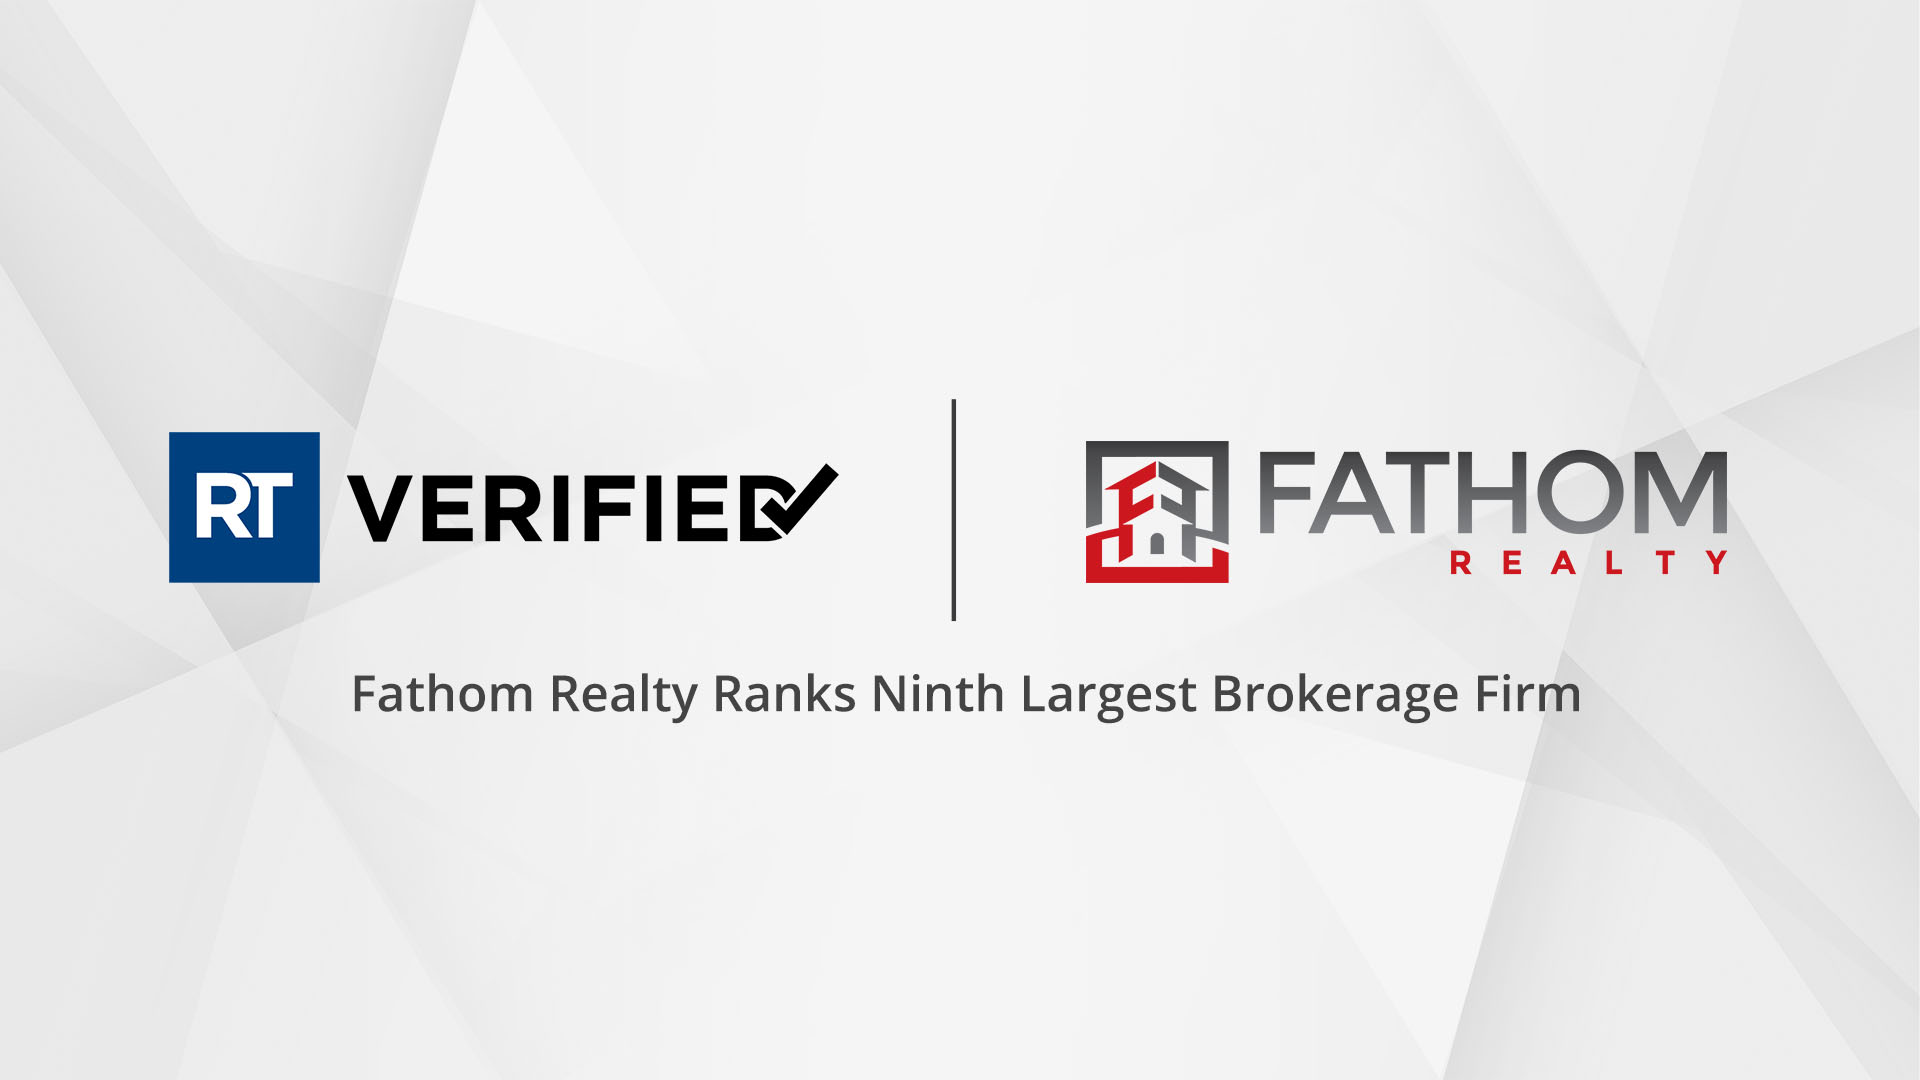 Featured image for “Fathom Realty Ranks Ninth Largest Brokerage Firm in Real Trends Verified Rankings”